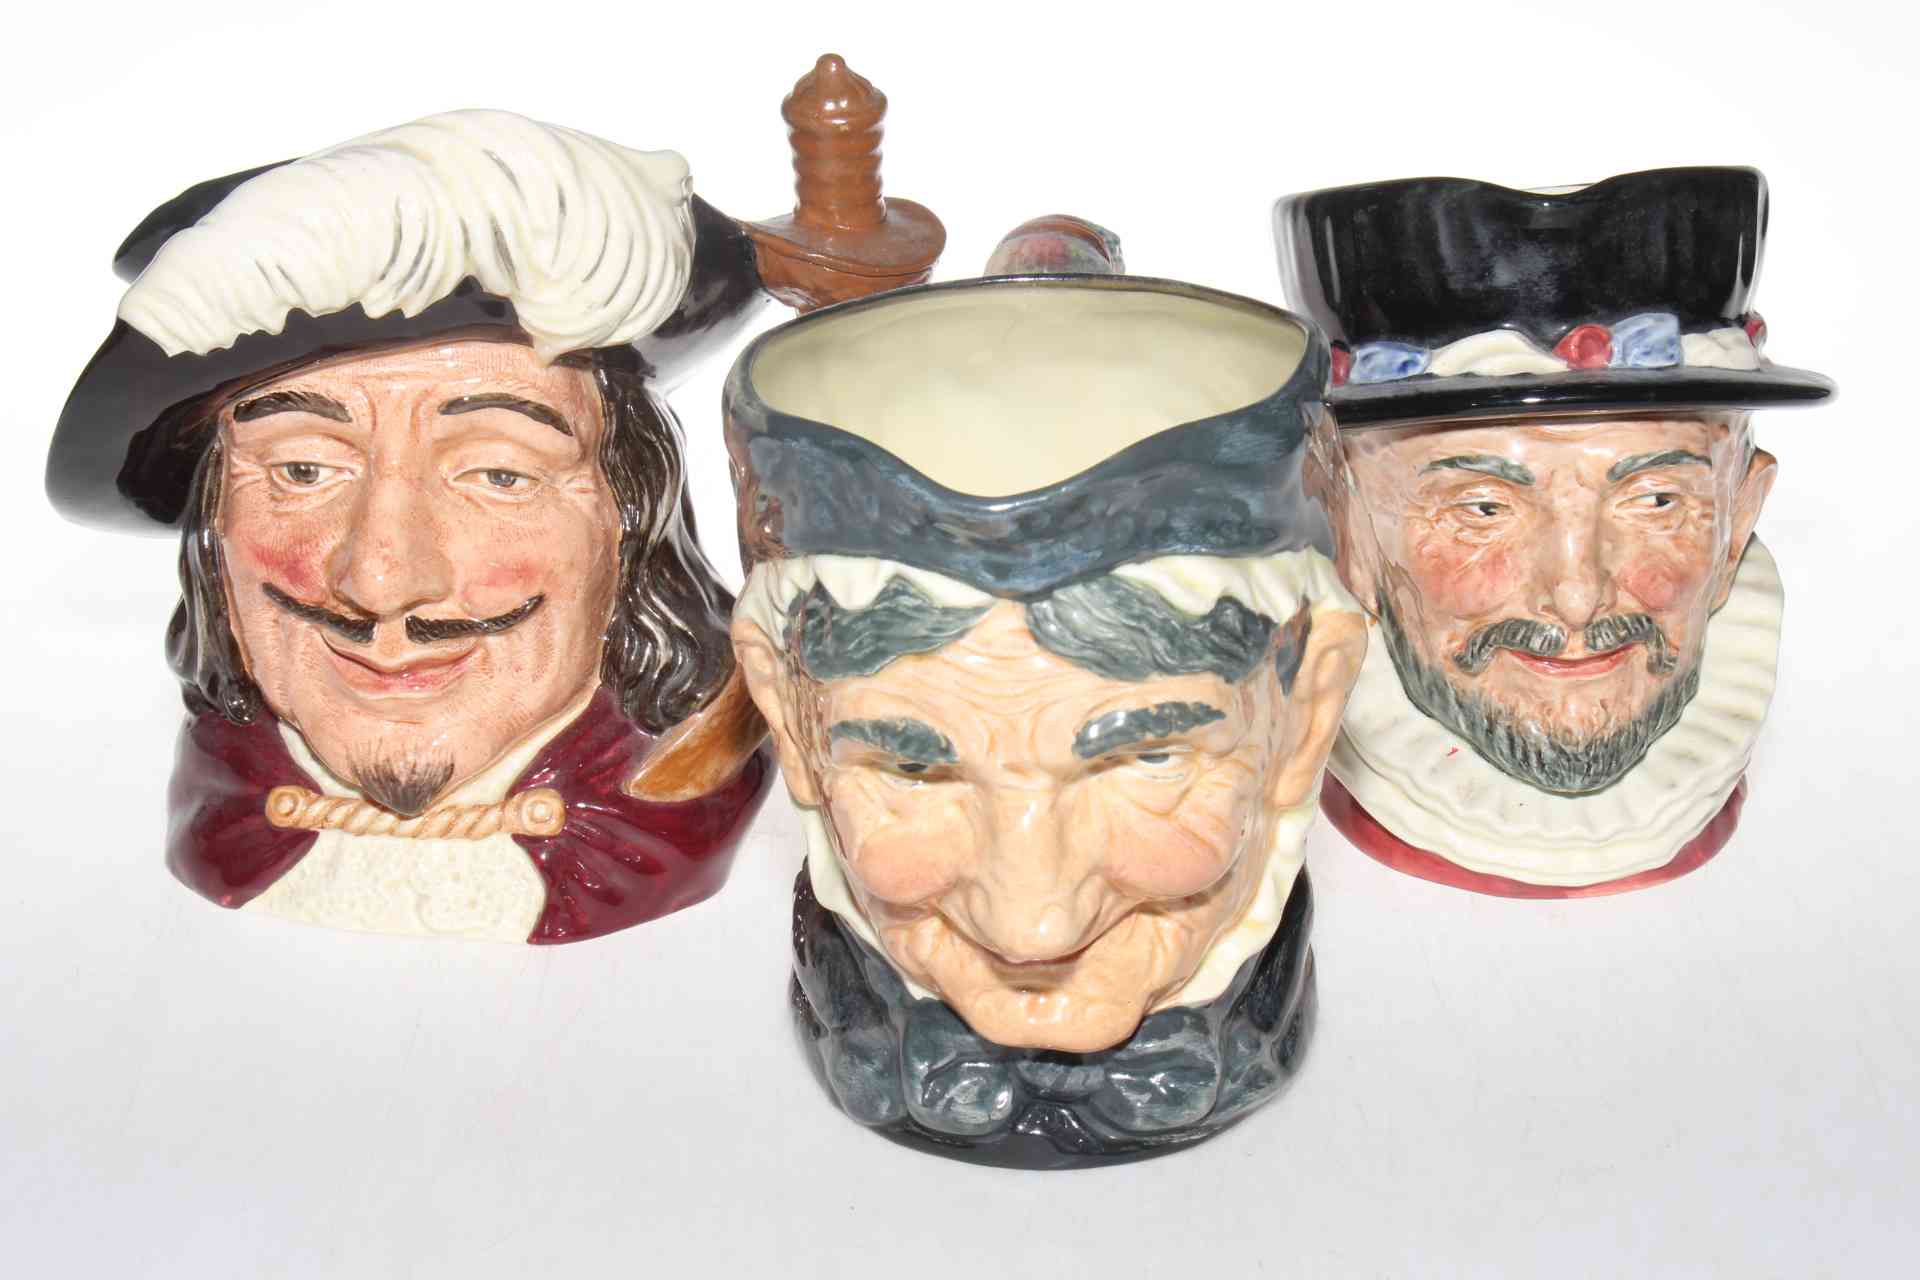 Three Royal Doulton character jugs, Beefeater, Porthos, and Granny with Tooth.